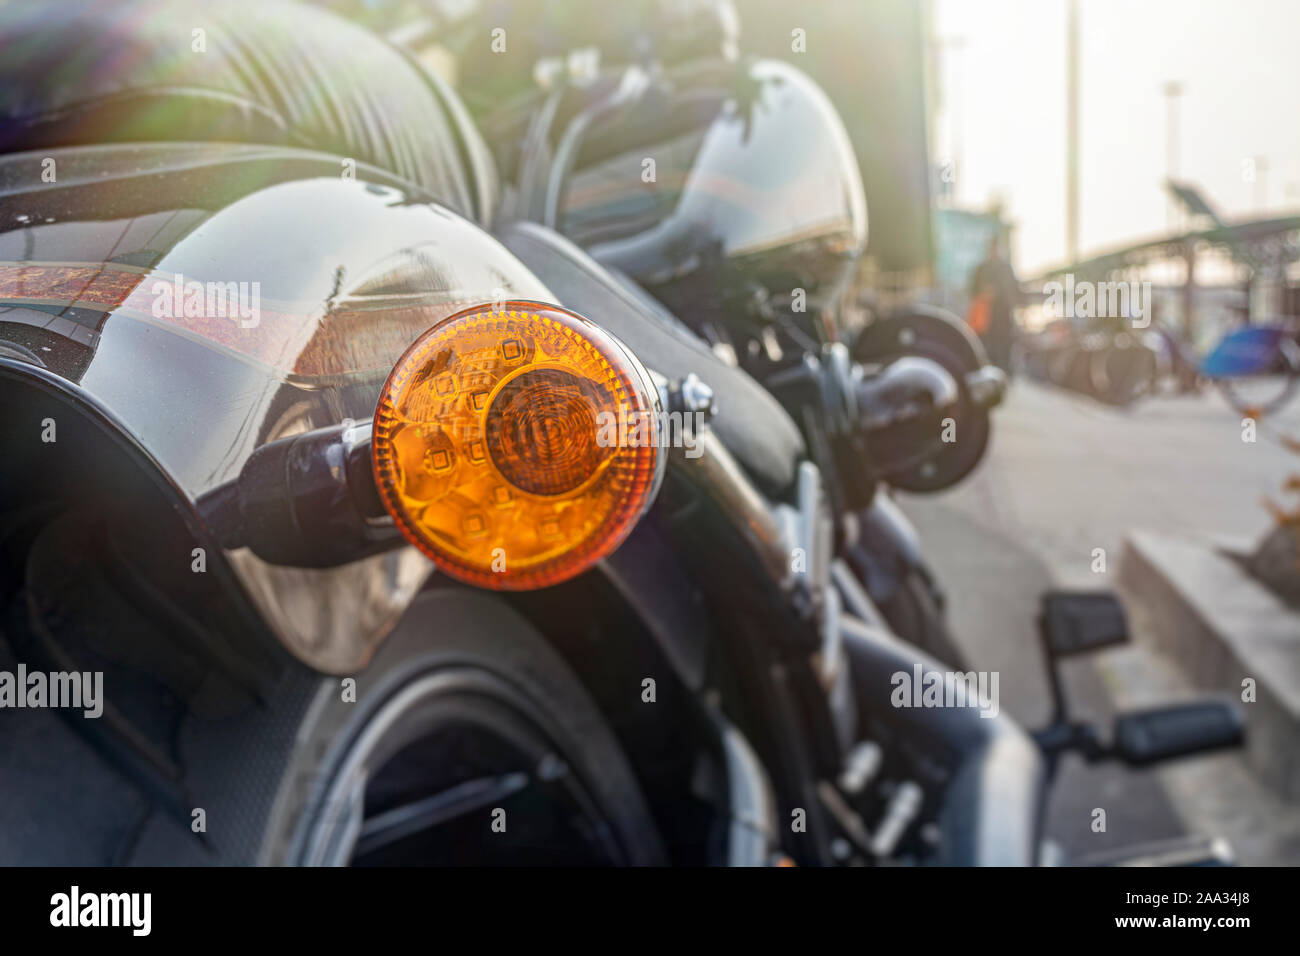 rear part of the motorcycle with a direction indicator, rear view Stock Photo